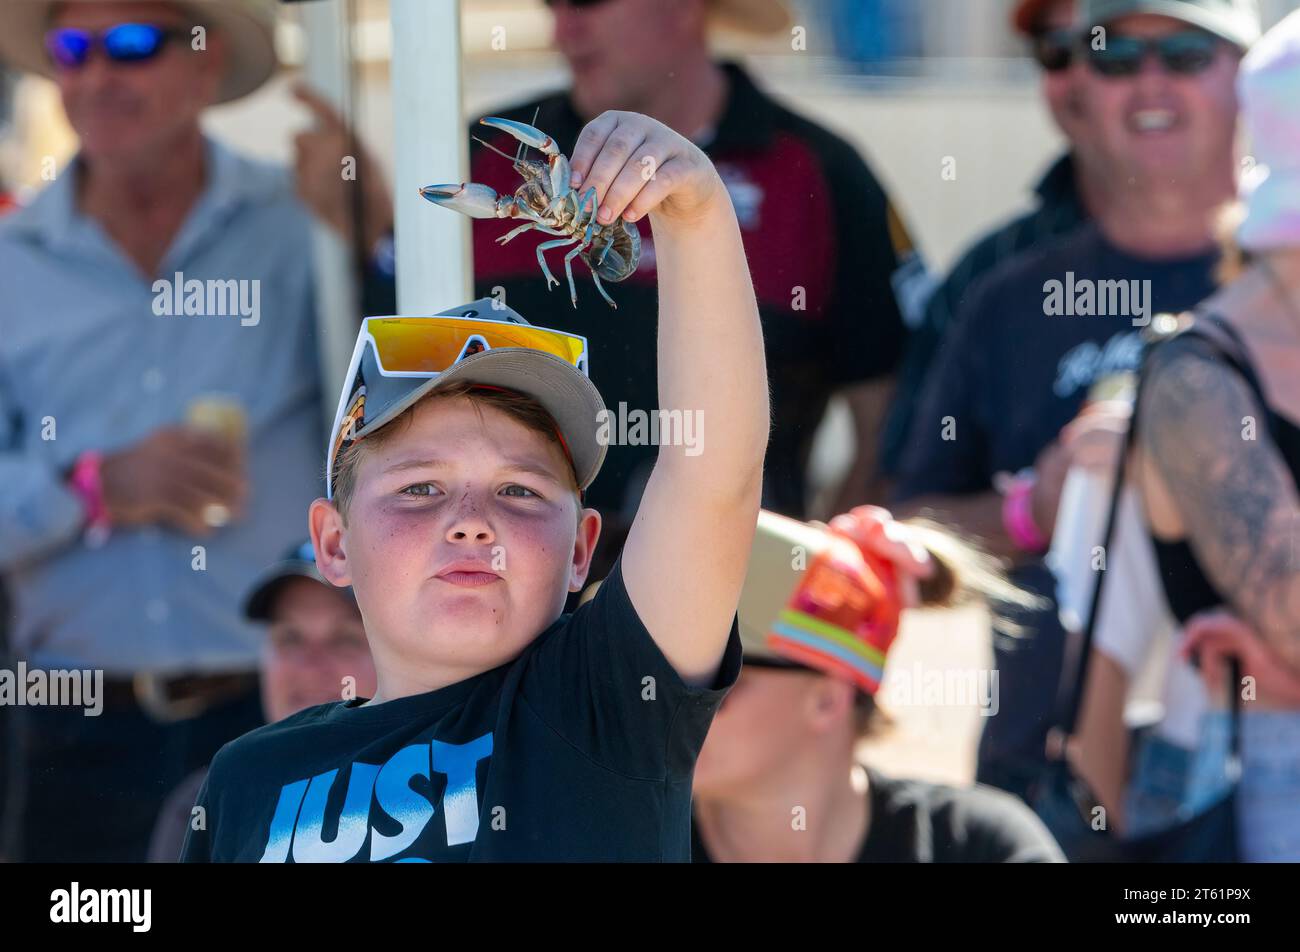 Young boy holding a yabby prior to the yabby race in Boulia, Queensland, QLD, Australia Stock Photo